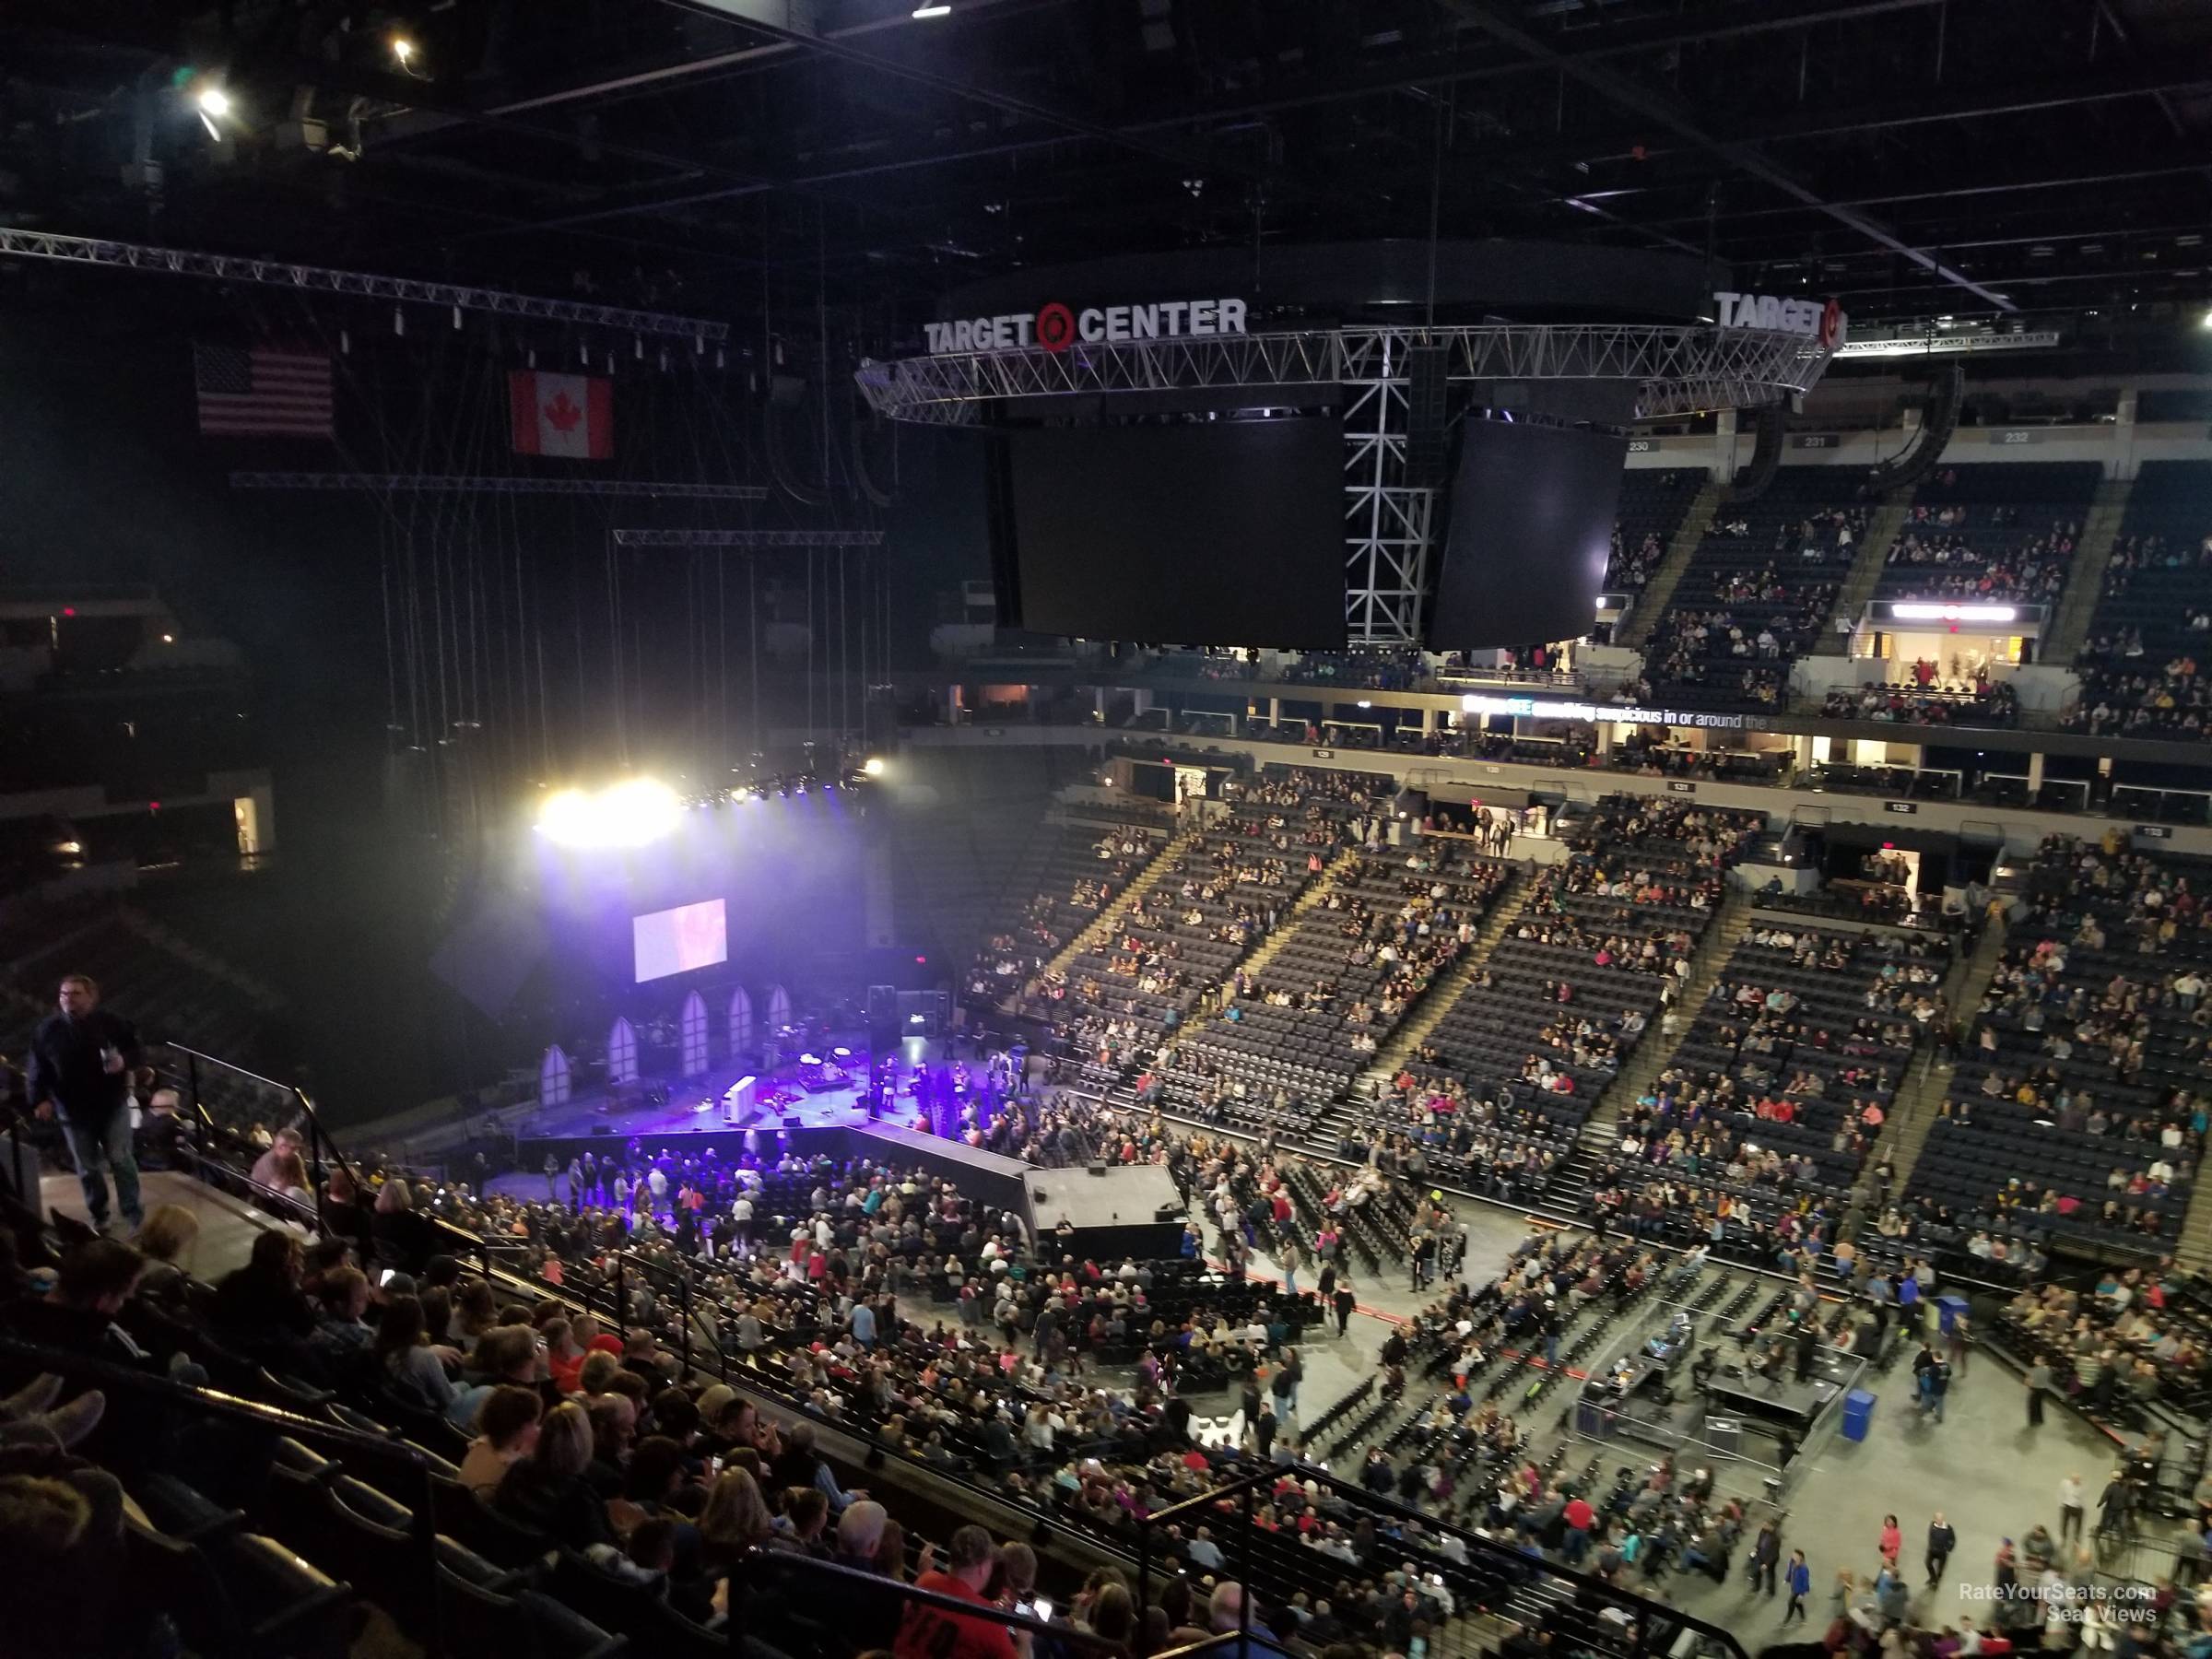 Target Center Section 208 Concert Seating - RateYourSeats.com